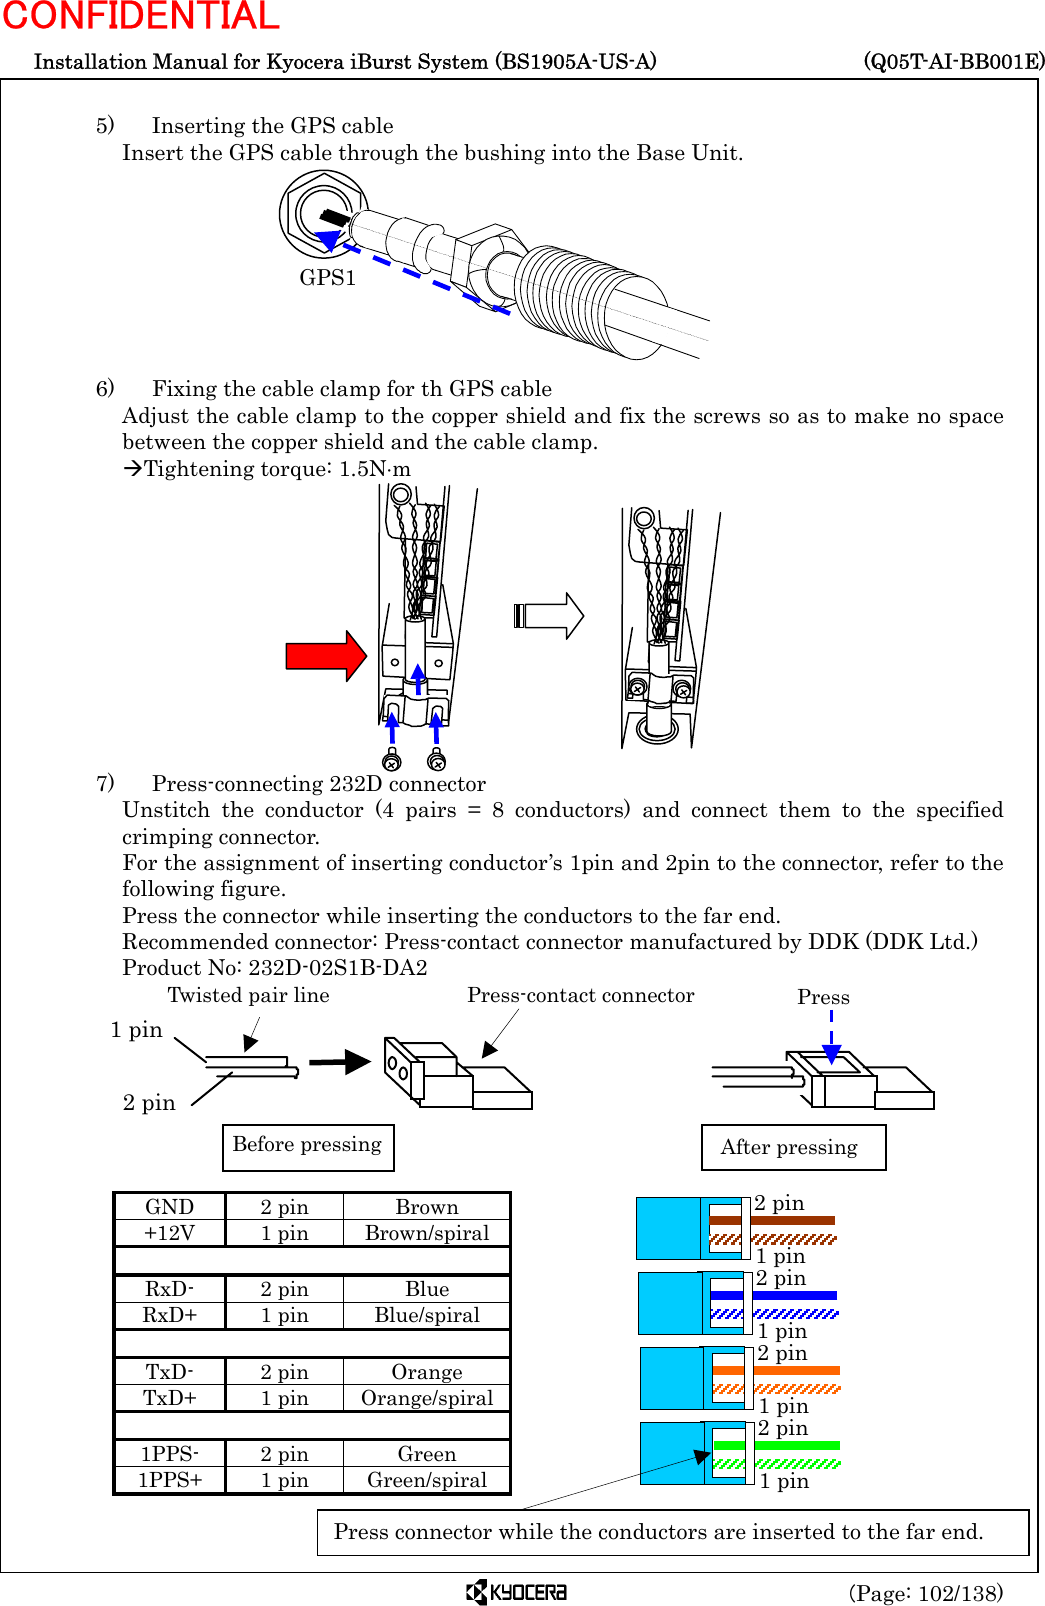  Installation Manual for Kyocera iBurst System (BS1905A-US-A)     (Q05T-AI-BB001E) (Page: 102/138) CONFIDENTIAL  5)    Inserting the GPS cable Insert the GPS cable through the bushing into the Base Unit.         6)    Fixing the cable clamp for th GPS cable Adjust the cable clamp to the copper shield and fix the screws so as to make no space between the copper shield and the cable clamp. ÆTightening torque: 1.5N⋅m            7)    Press-connecting 232D connector Unstitch the conductor (4 pairs = 8 conductors) and connect them to the specified crimping connector. For the assignment of inserting conductor’s 1pin and 2pin to the connector, refer to the following figure. Press the connector while inserting the conductors to the far end. Recommended connector: Press-contact connector manufactured by DDK (DDK Ltd.) Product No: 232D-02S1B-DA2         GND 2 pin  Brown +12V 1 pin Brown/spiral     RxD- 2 pin  Blue RxD+ 1 pin Blue/spiral     TxD- 2 pin  Orange TxD+ 1 pin Orange/spiral     1PPS- 2 pin  Green 1PPS+ 1 pin Green/spiral  Twisted pair line Press-contact connector2 pin1 pinBefore pressing After pressingPressGPS1 1 pin 2 pin 1 pin 2 pin 1 pin 2 pin 1 pin 2 pin Press connector while the conductors are inserted to the far end. 